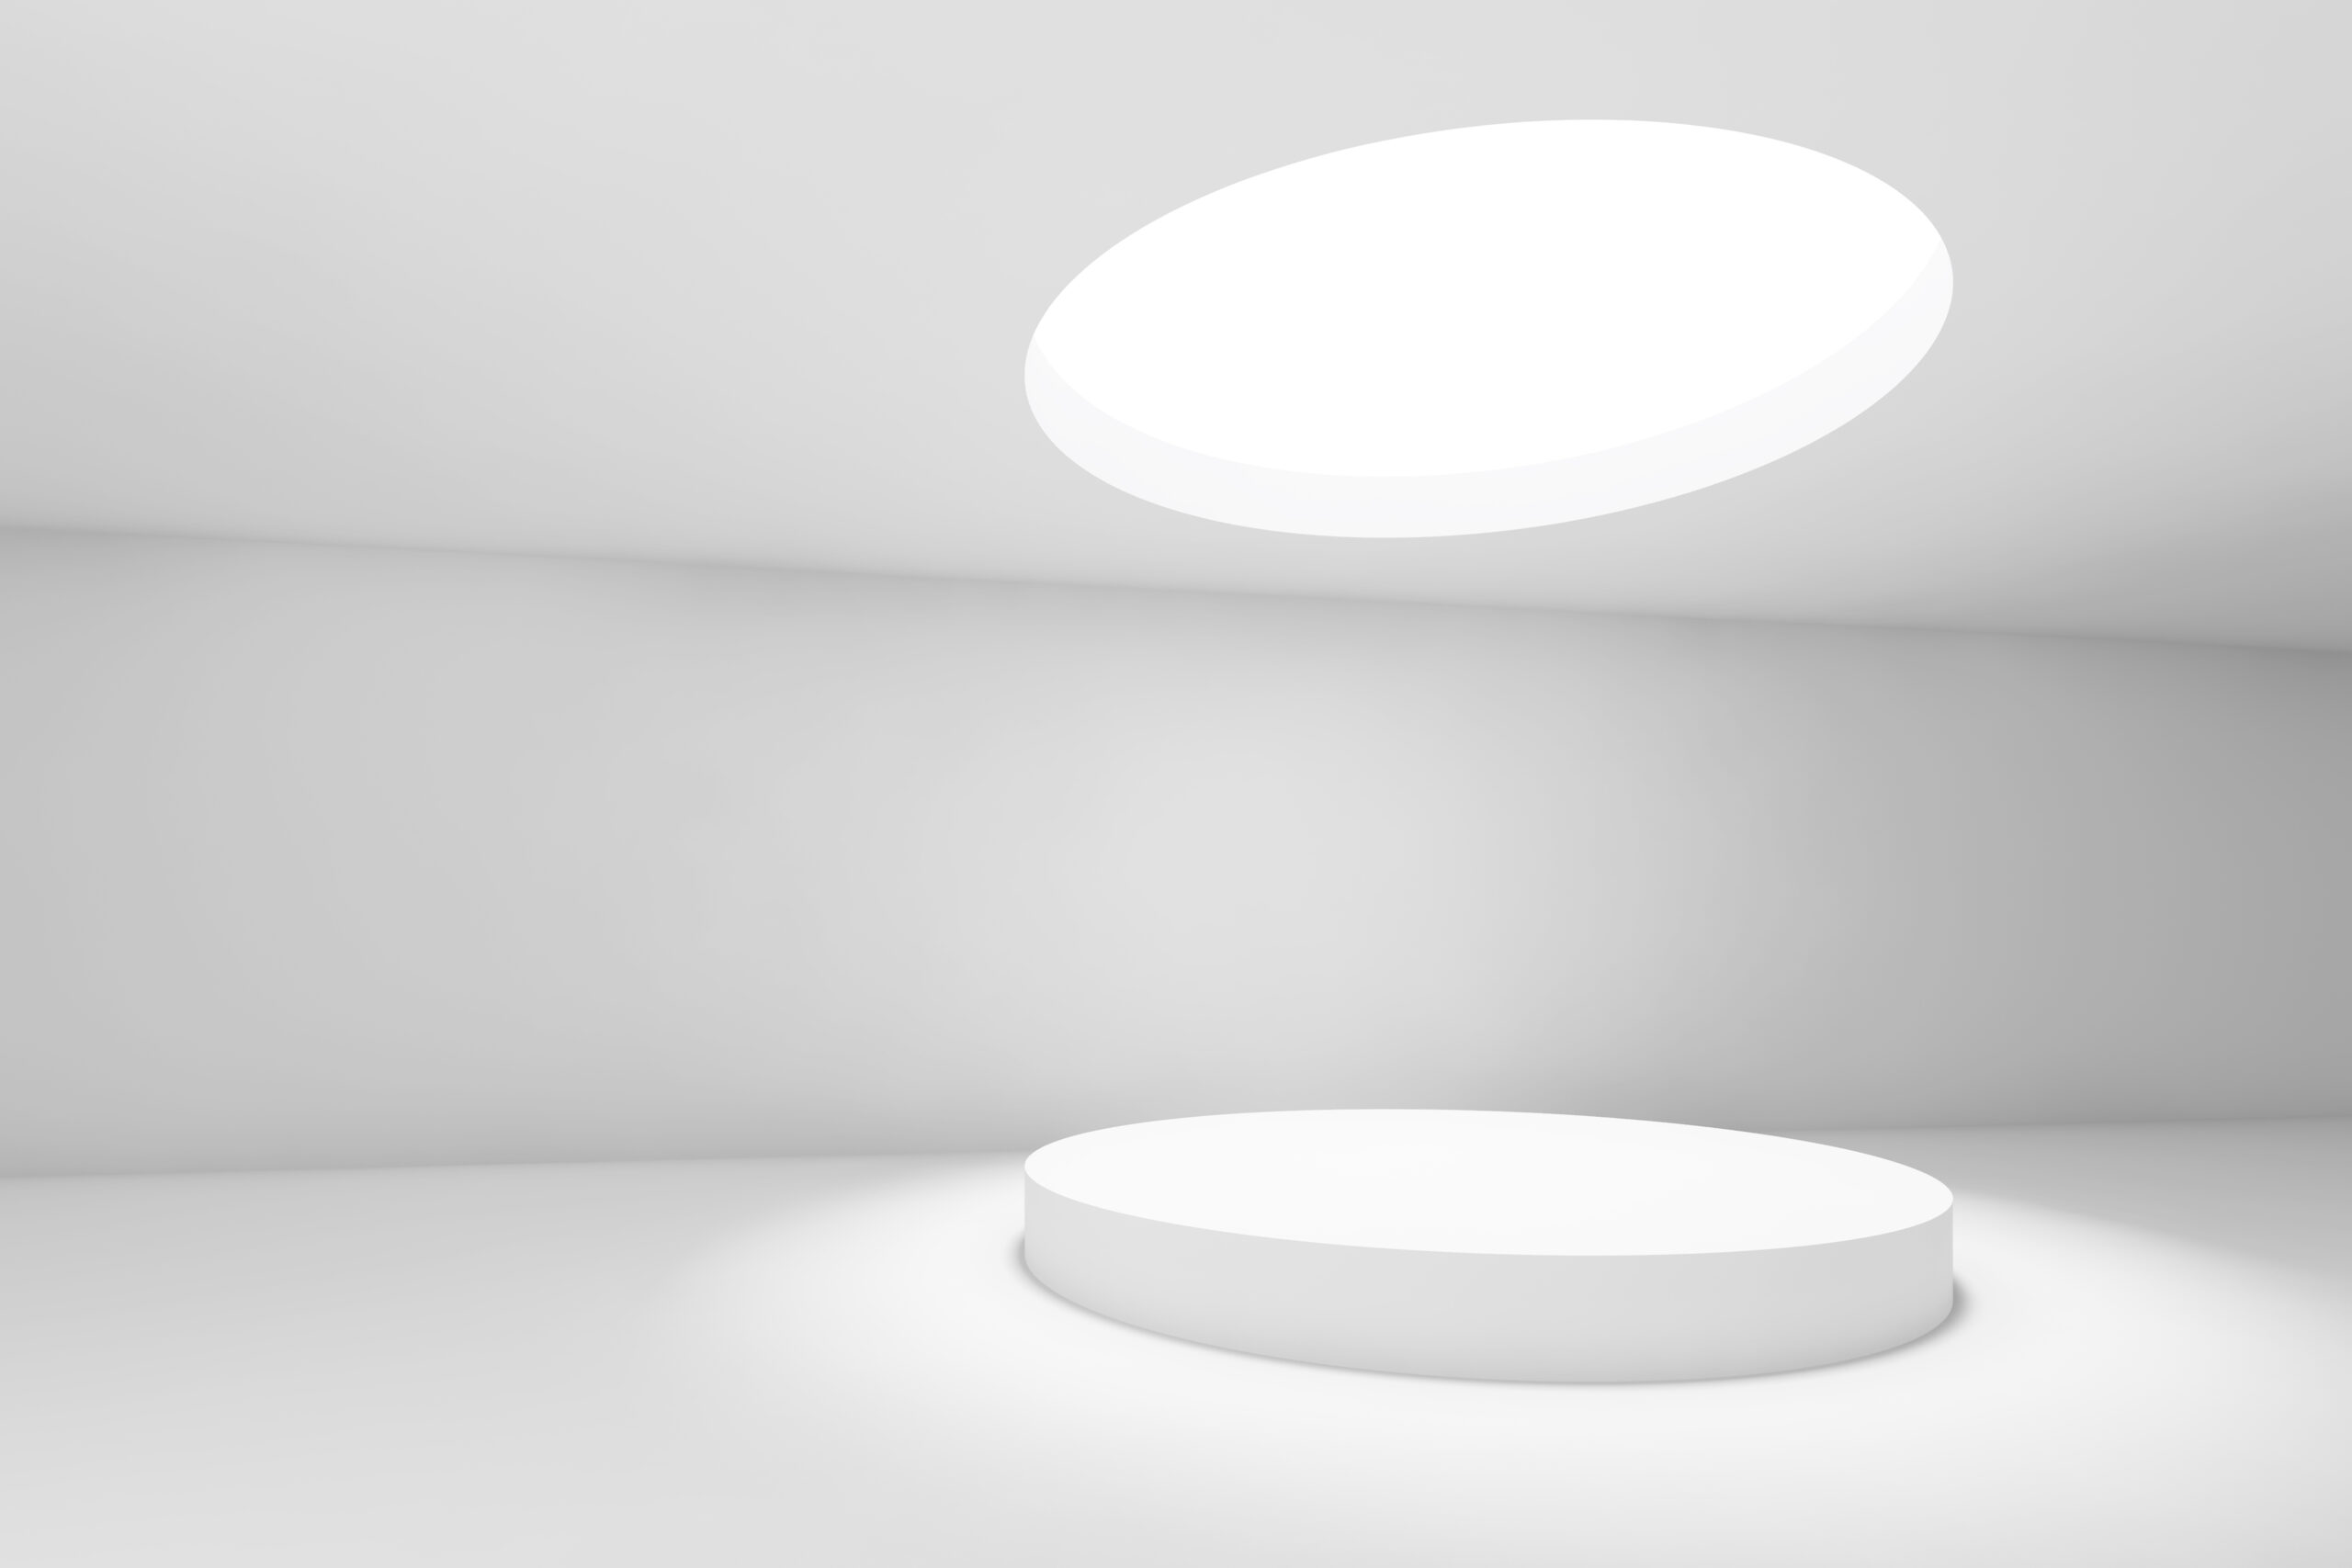 Blank 3d showroom with round ceiling light